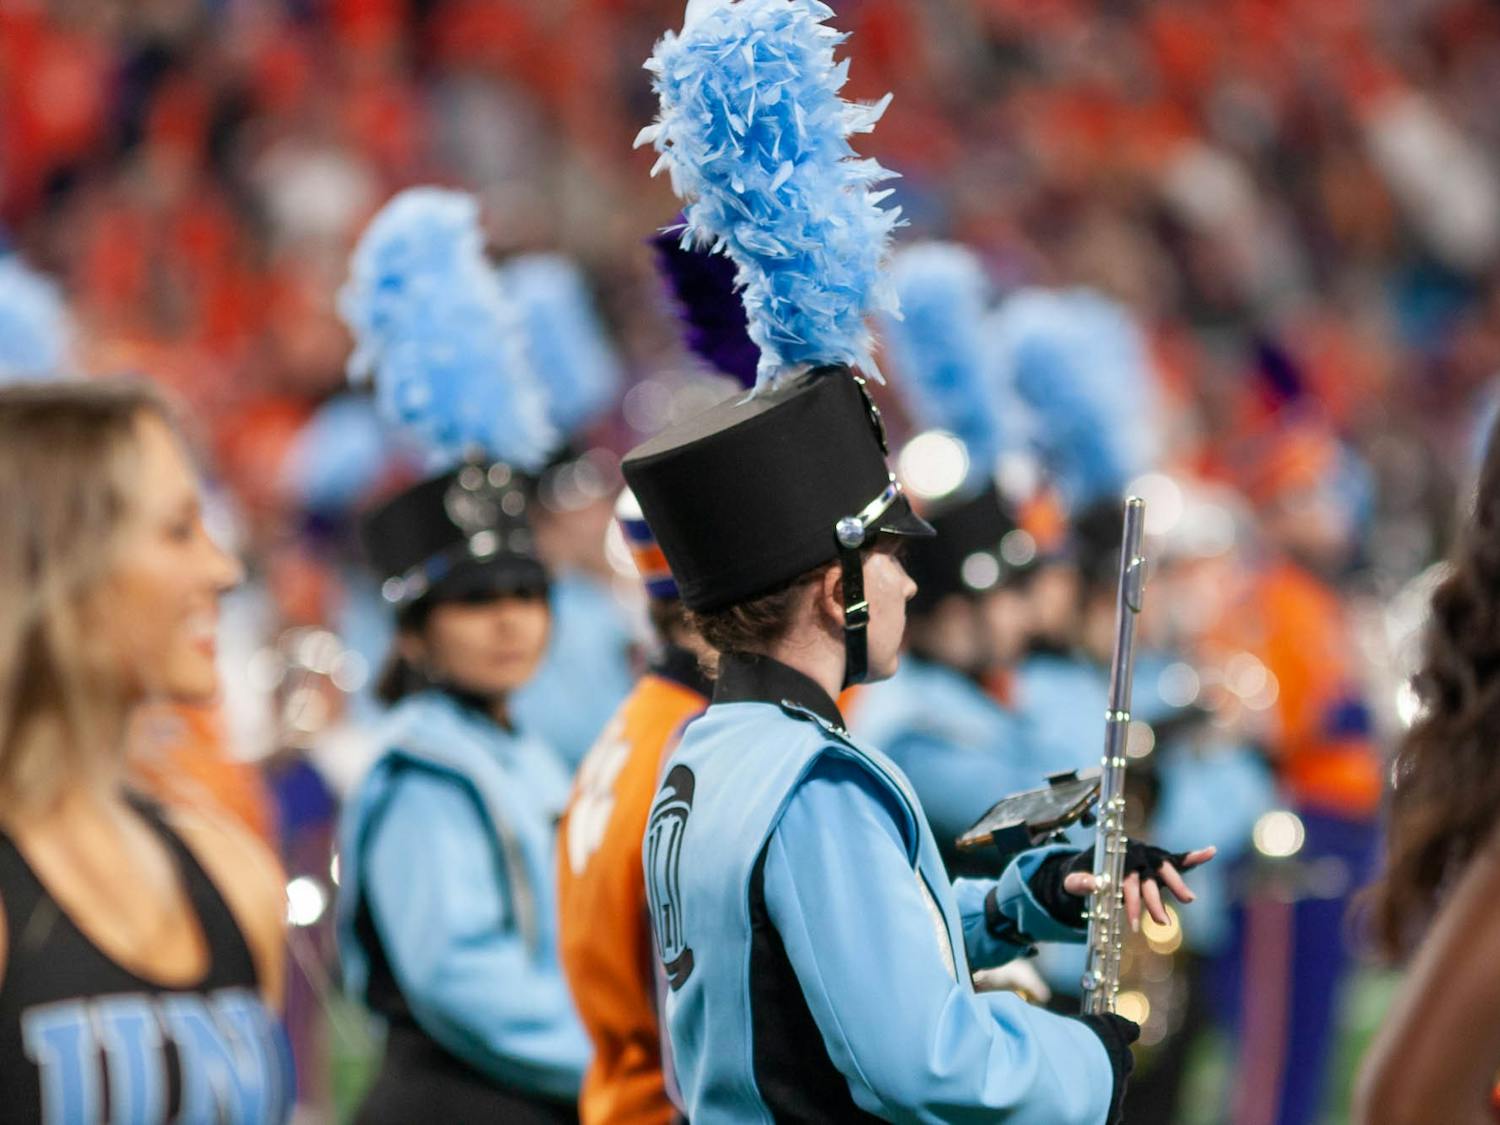 The Marching Tar Heels and the Clemson University Tiger Band prepare to play the Star Spangled Banner before the 2022 Subway ACC Football Championship Game against Clemson to begin at the Bank of America Stadium on Saturday, Dec. 3, 2022. UNC fell to Clemson 39-10.